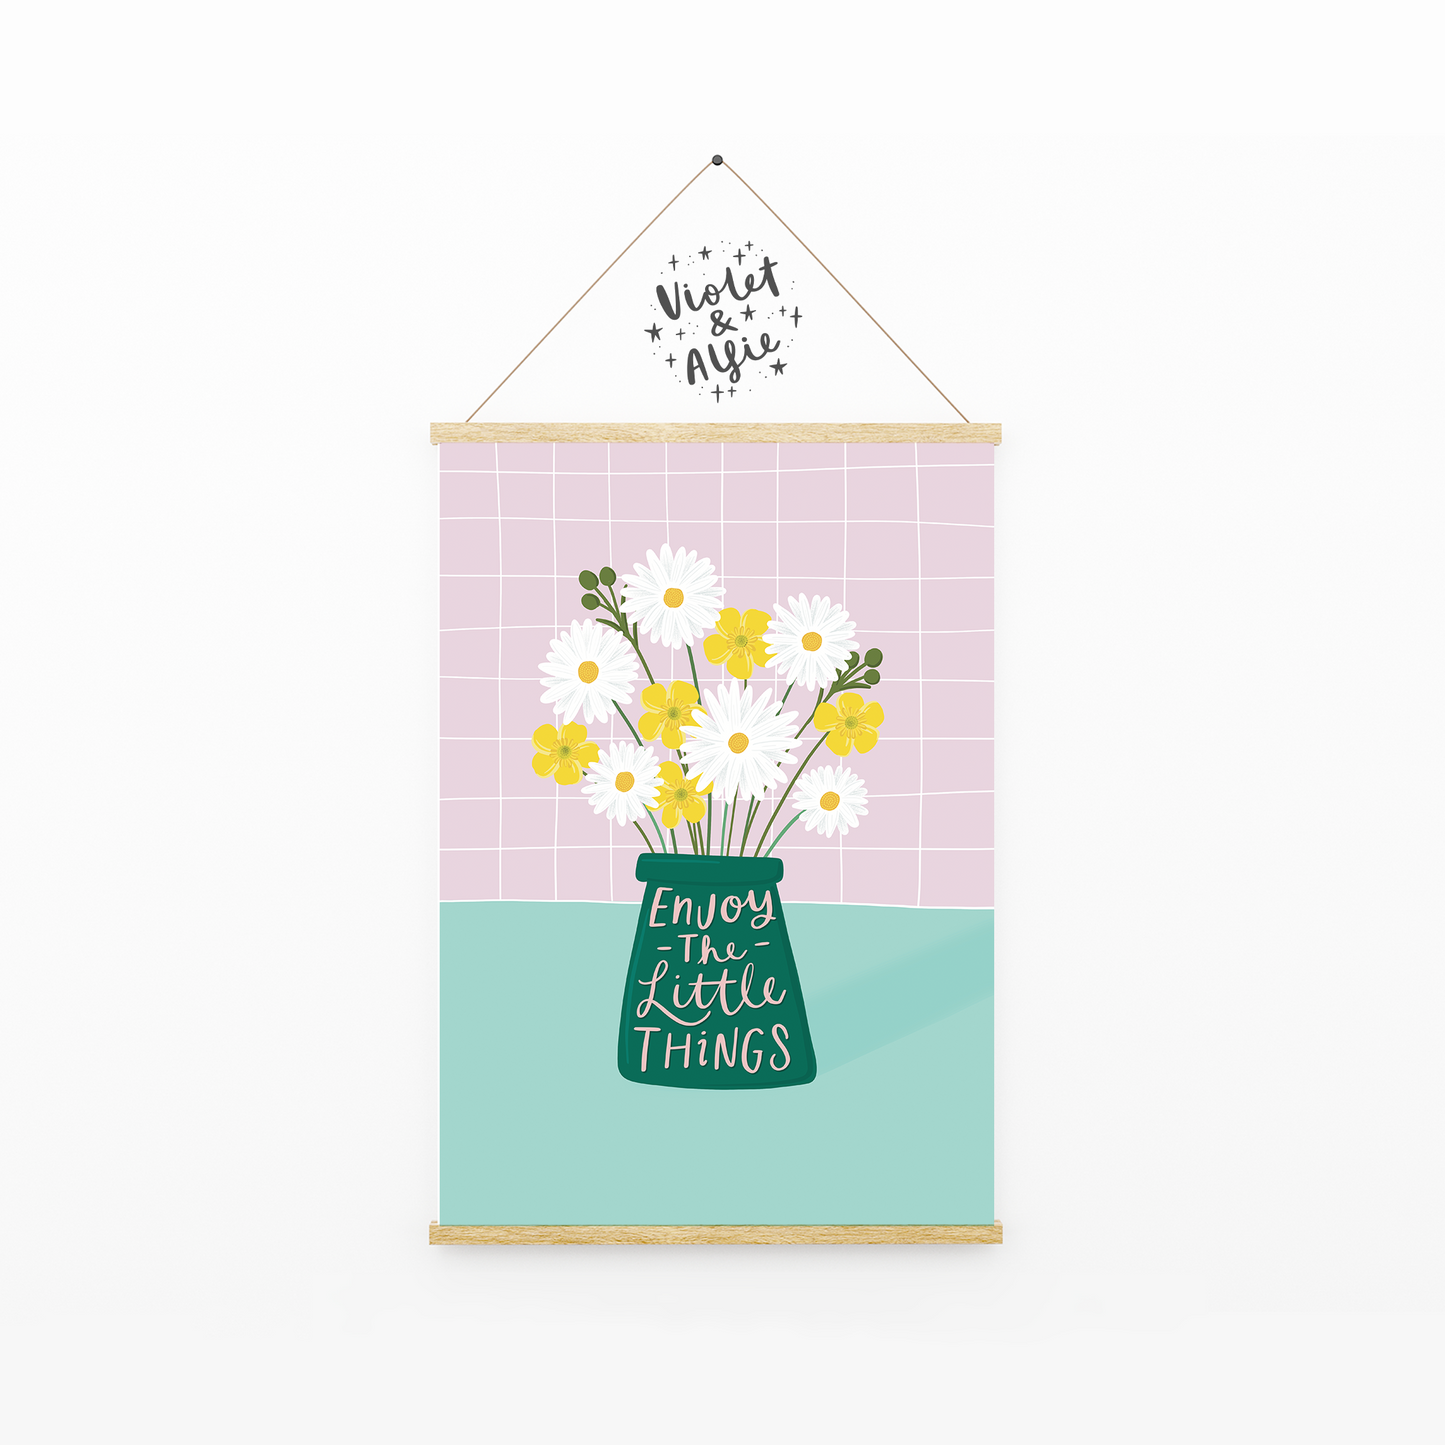 enjoy the little things, quote print, happy wall art, daisies and buttercups, flower illustration, botanical wall art, flower prints, colourful decor, pastel wall art